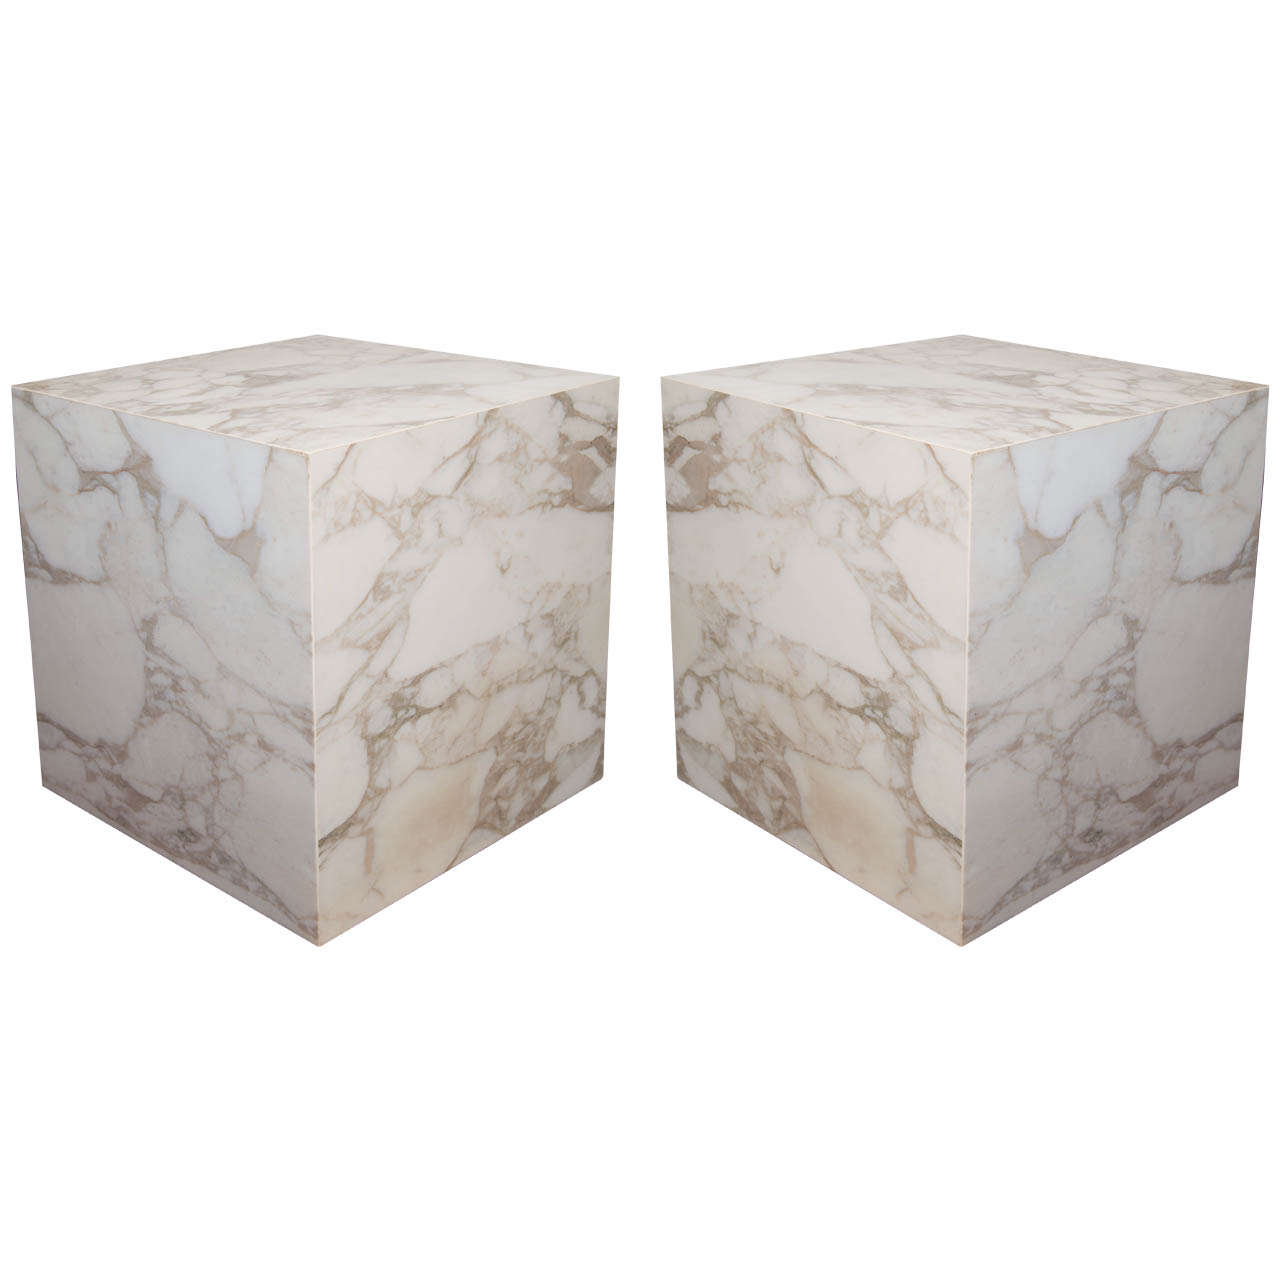 A Mid Century Pair of Cube Form Solid Marble Slab End or Side ... - A Mid Century Pair of Cube Form Solid Marble Slab End or Side Tables 1